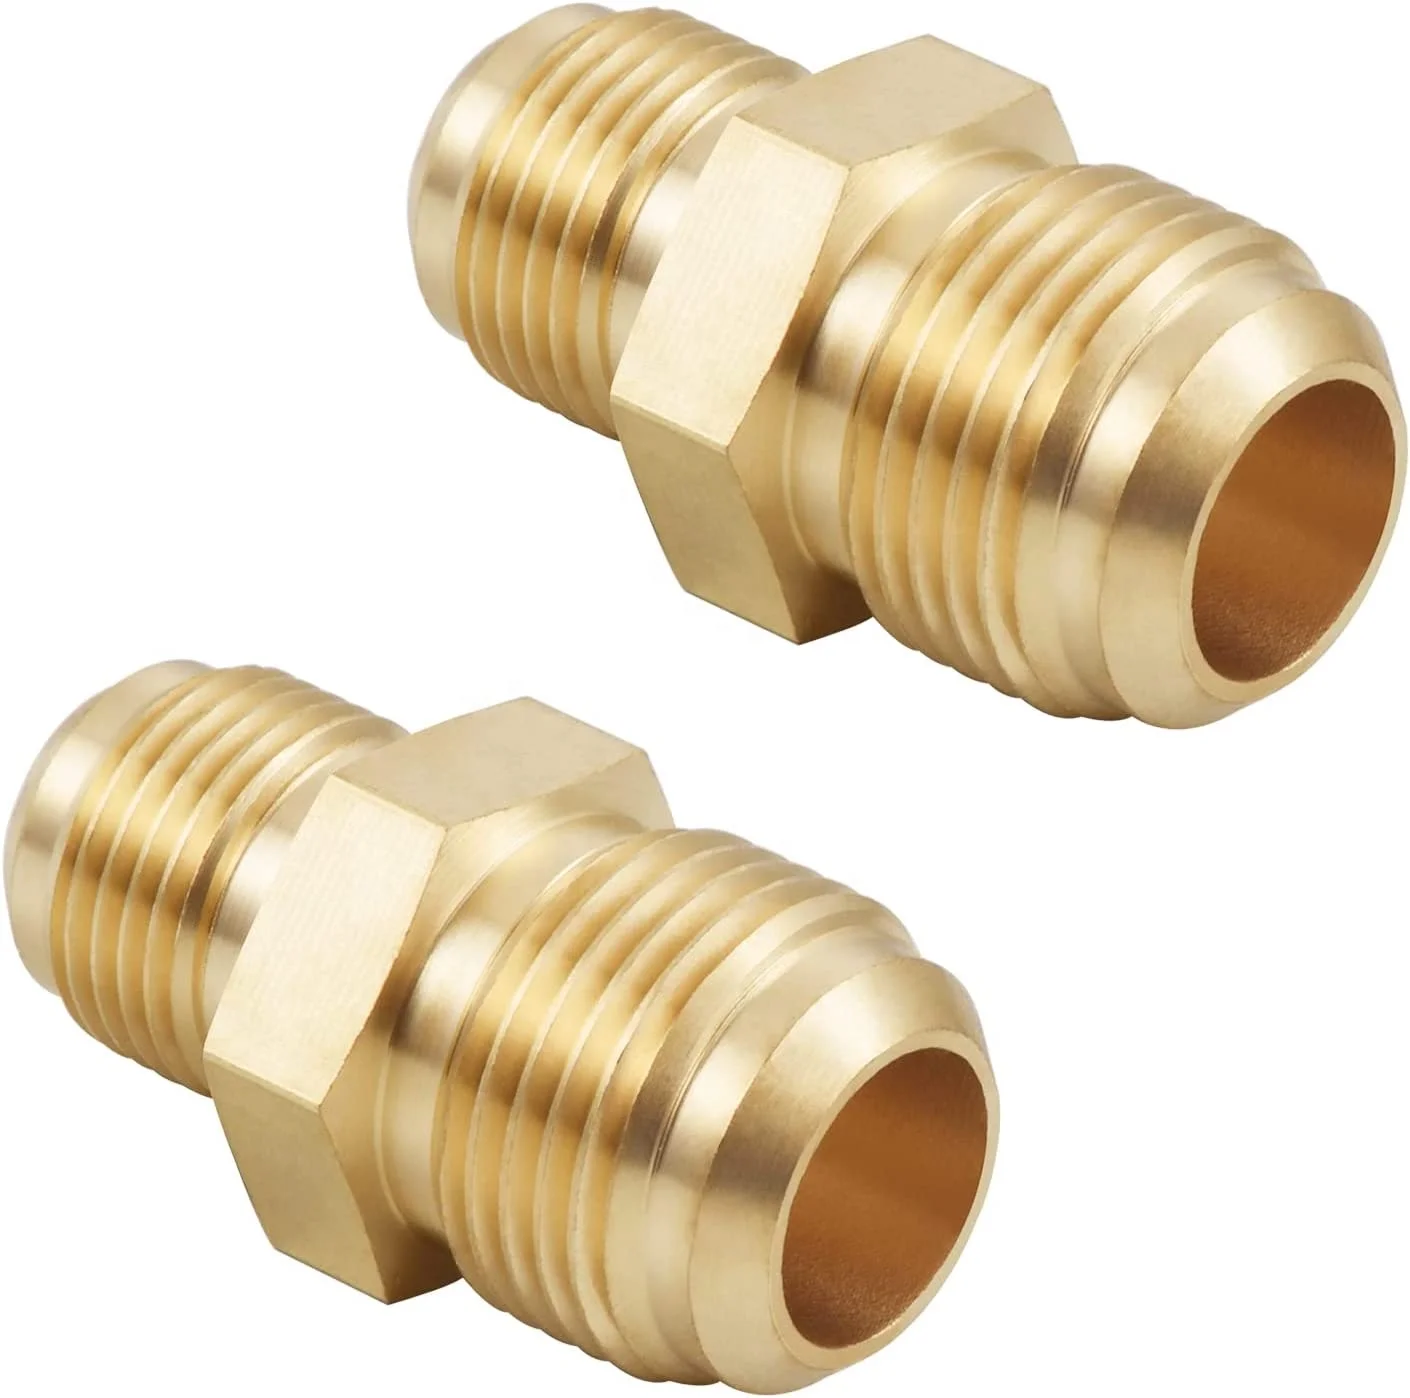 Brass Tube Flare Fittings Union Connector Gas Adapter Brass Tube Coupler  3/8 inch Male Flare to 1/2 inch Male (1600691010477)